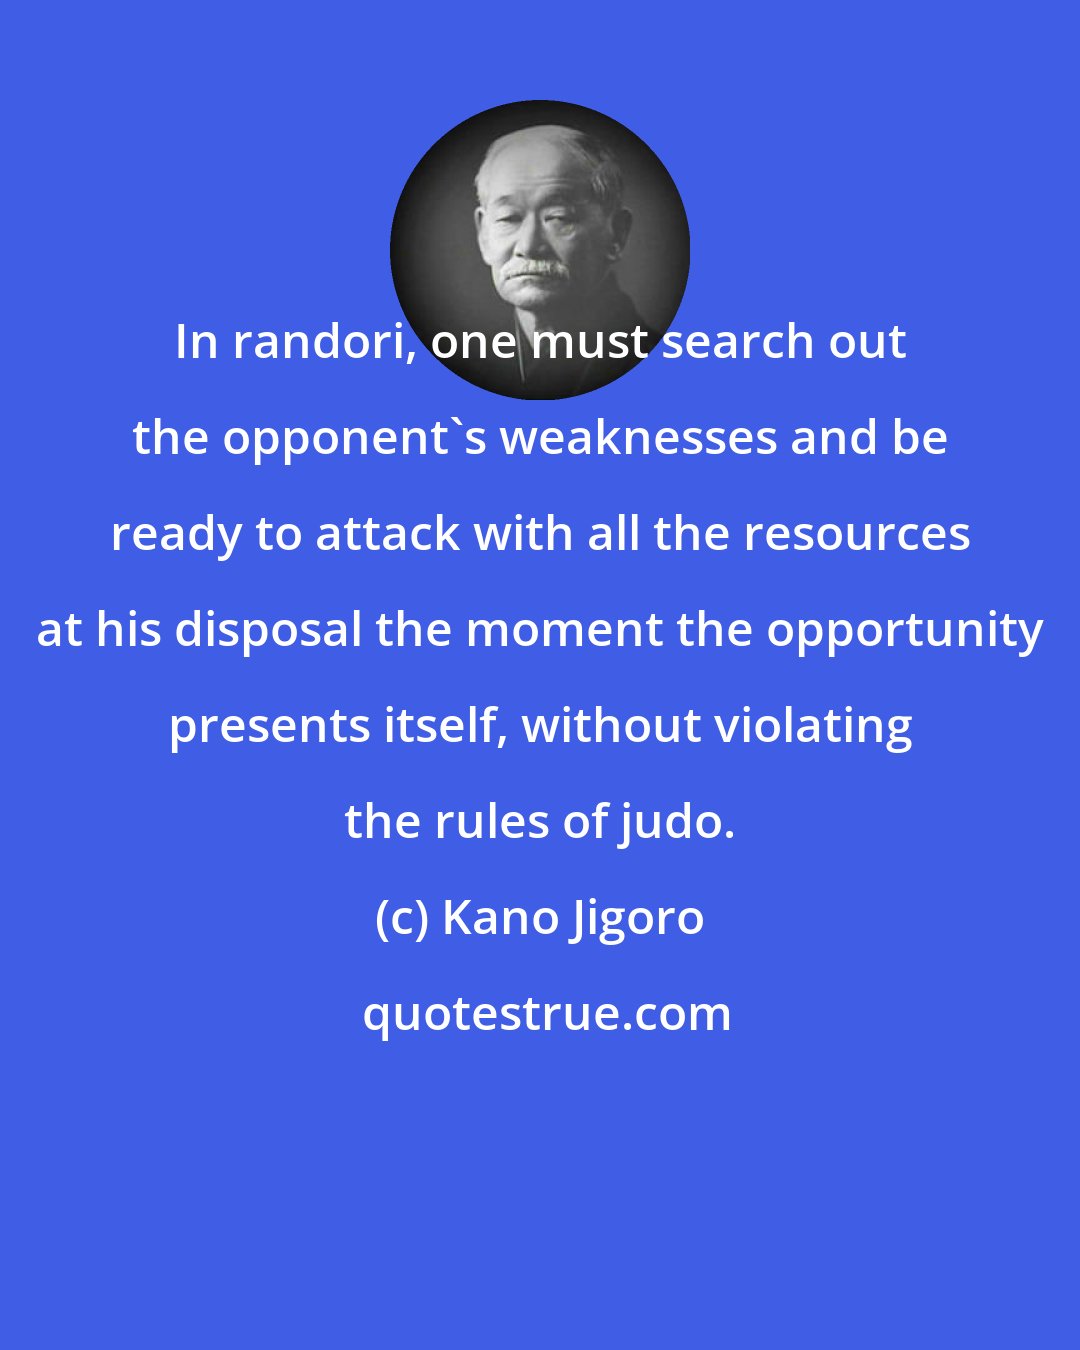 Kano Jigoro: In randori, one must search out the opponent's weaknesses and be ready to attack with all the resources at his disposal the moment the opportunity presents itself, without violating the rules of judo.